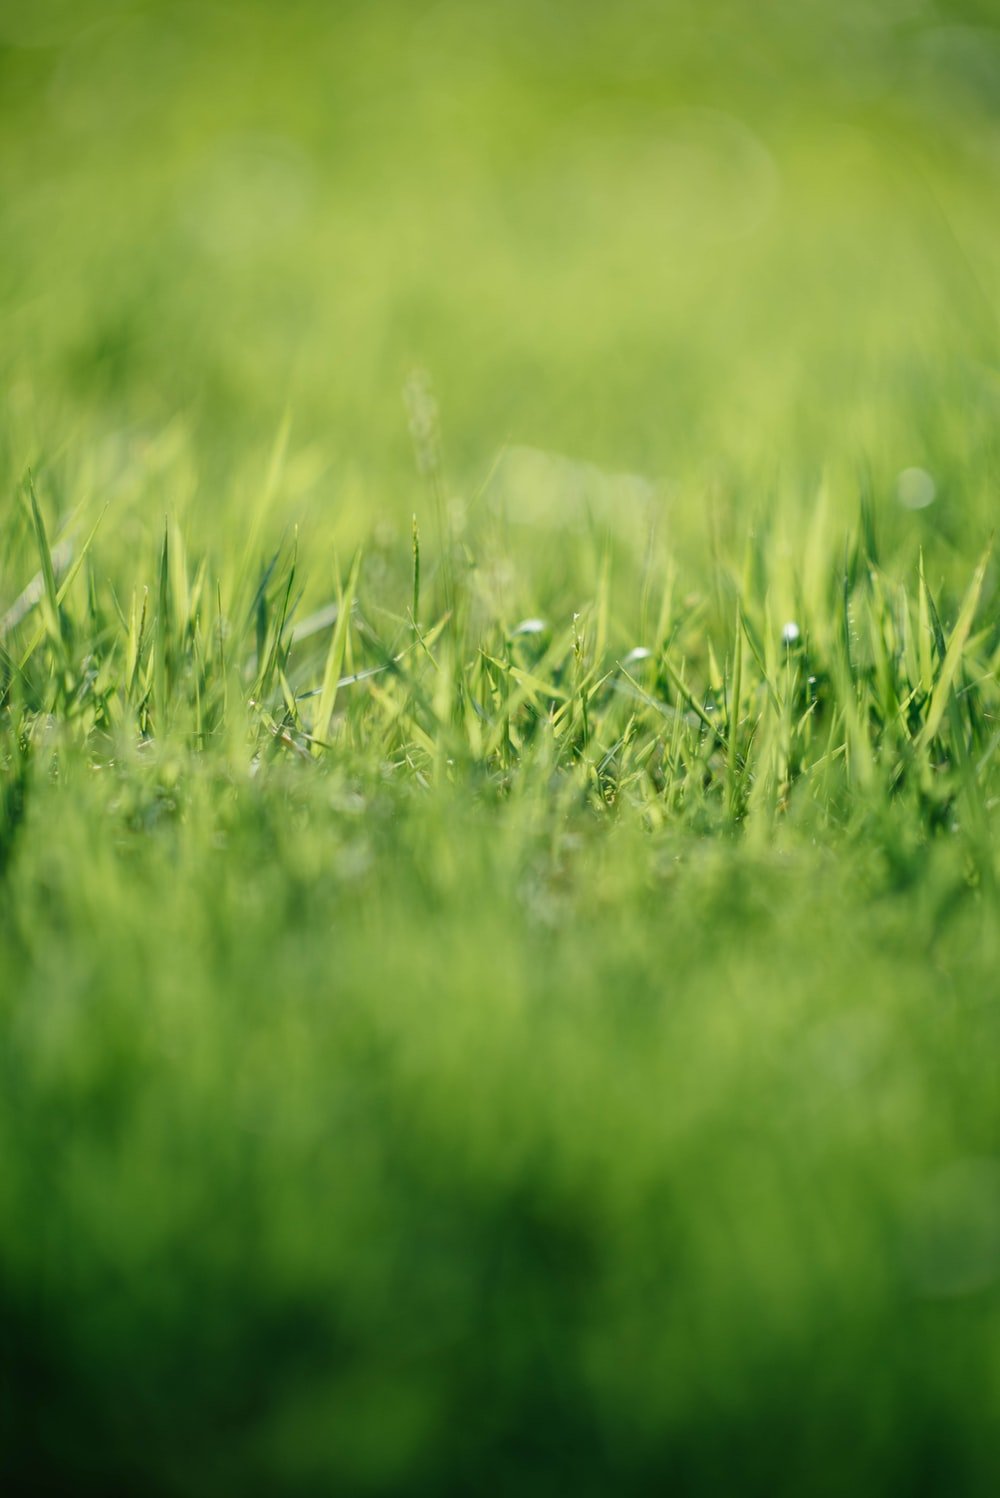 Grass Background Image: Download HD Background